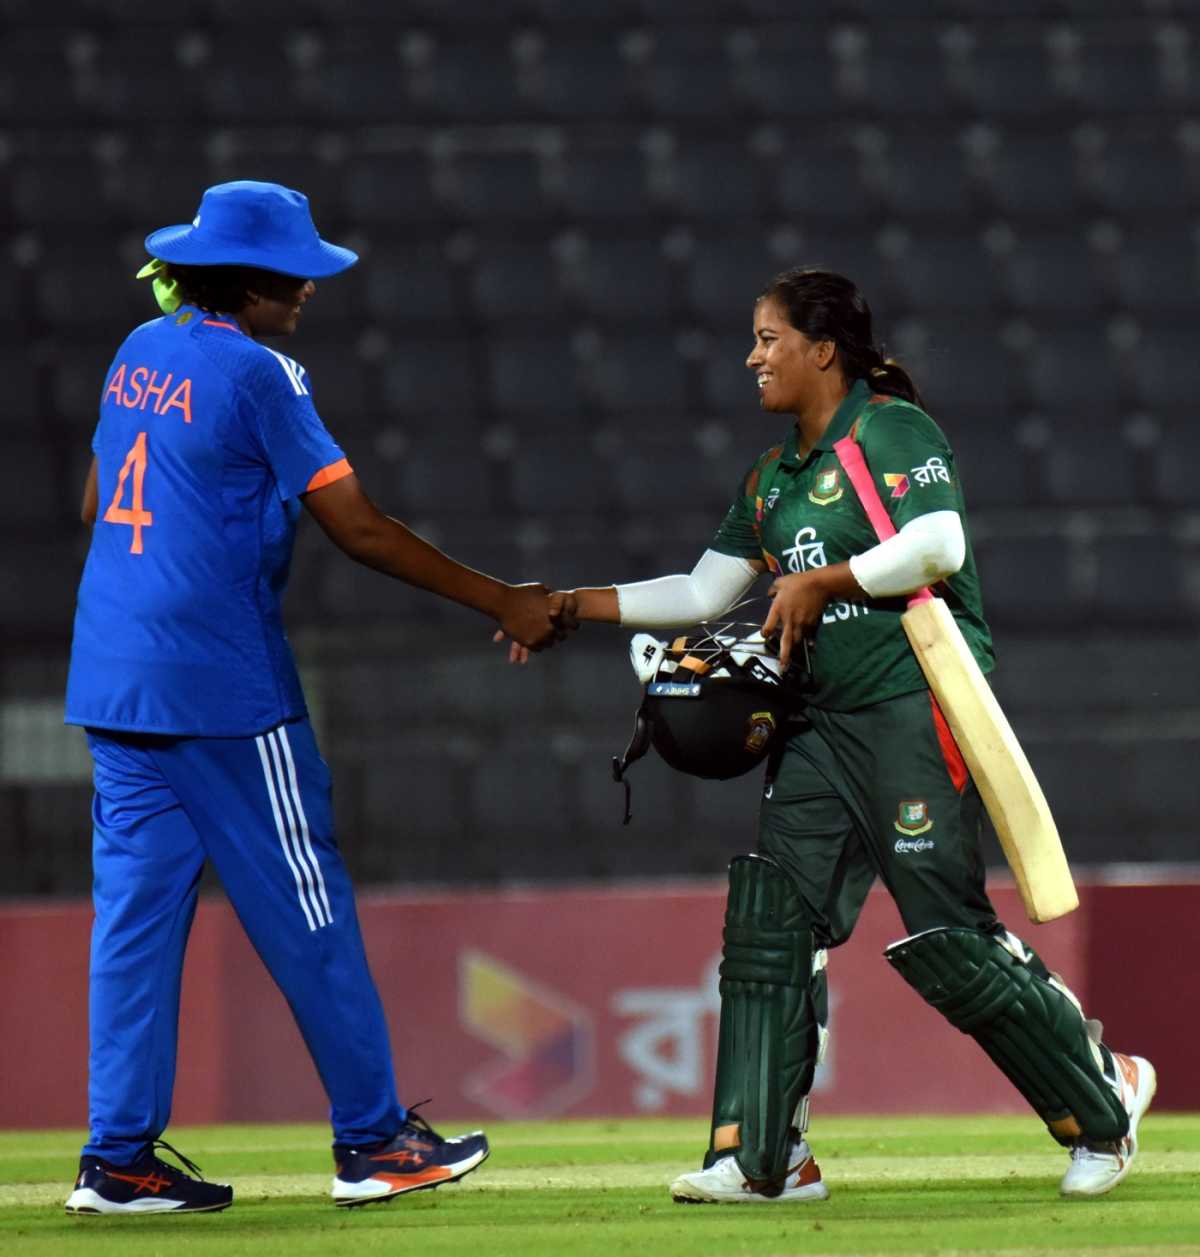 Debutant S Asha, who finished with 2 for 18, shakes hands with Nahida Akter, Bangladesh vs India, 4th women's T20I, Sylhet, May 6, 2024